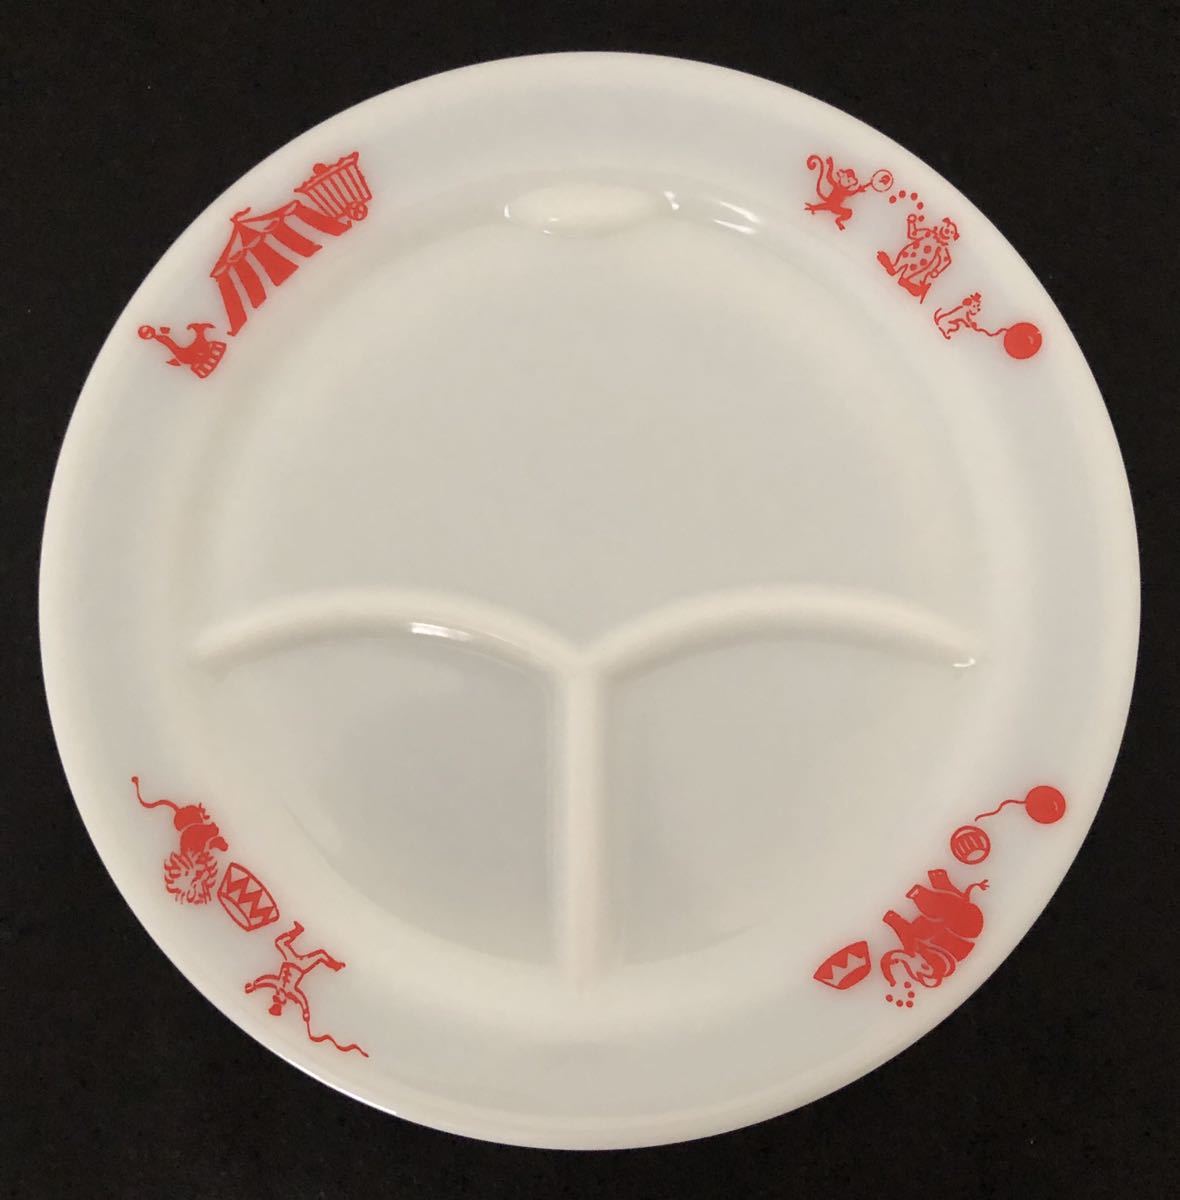  Pyrex PYREX Tableware by CORNING plate plate 